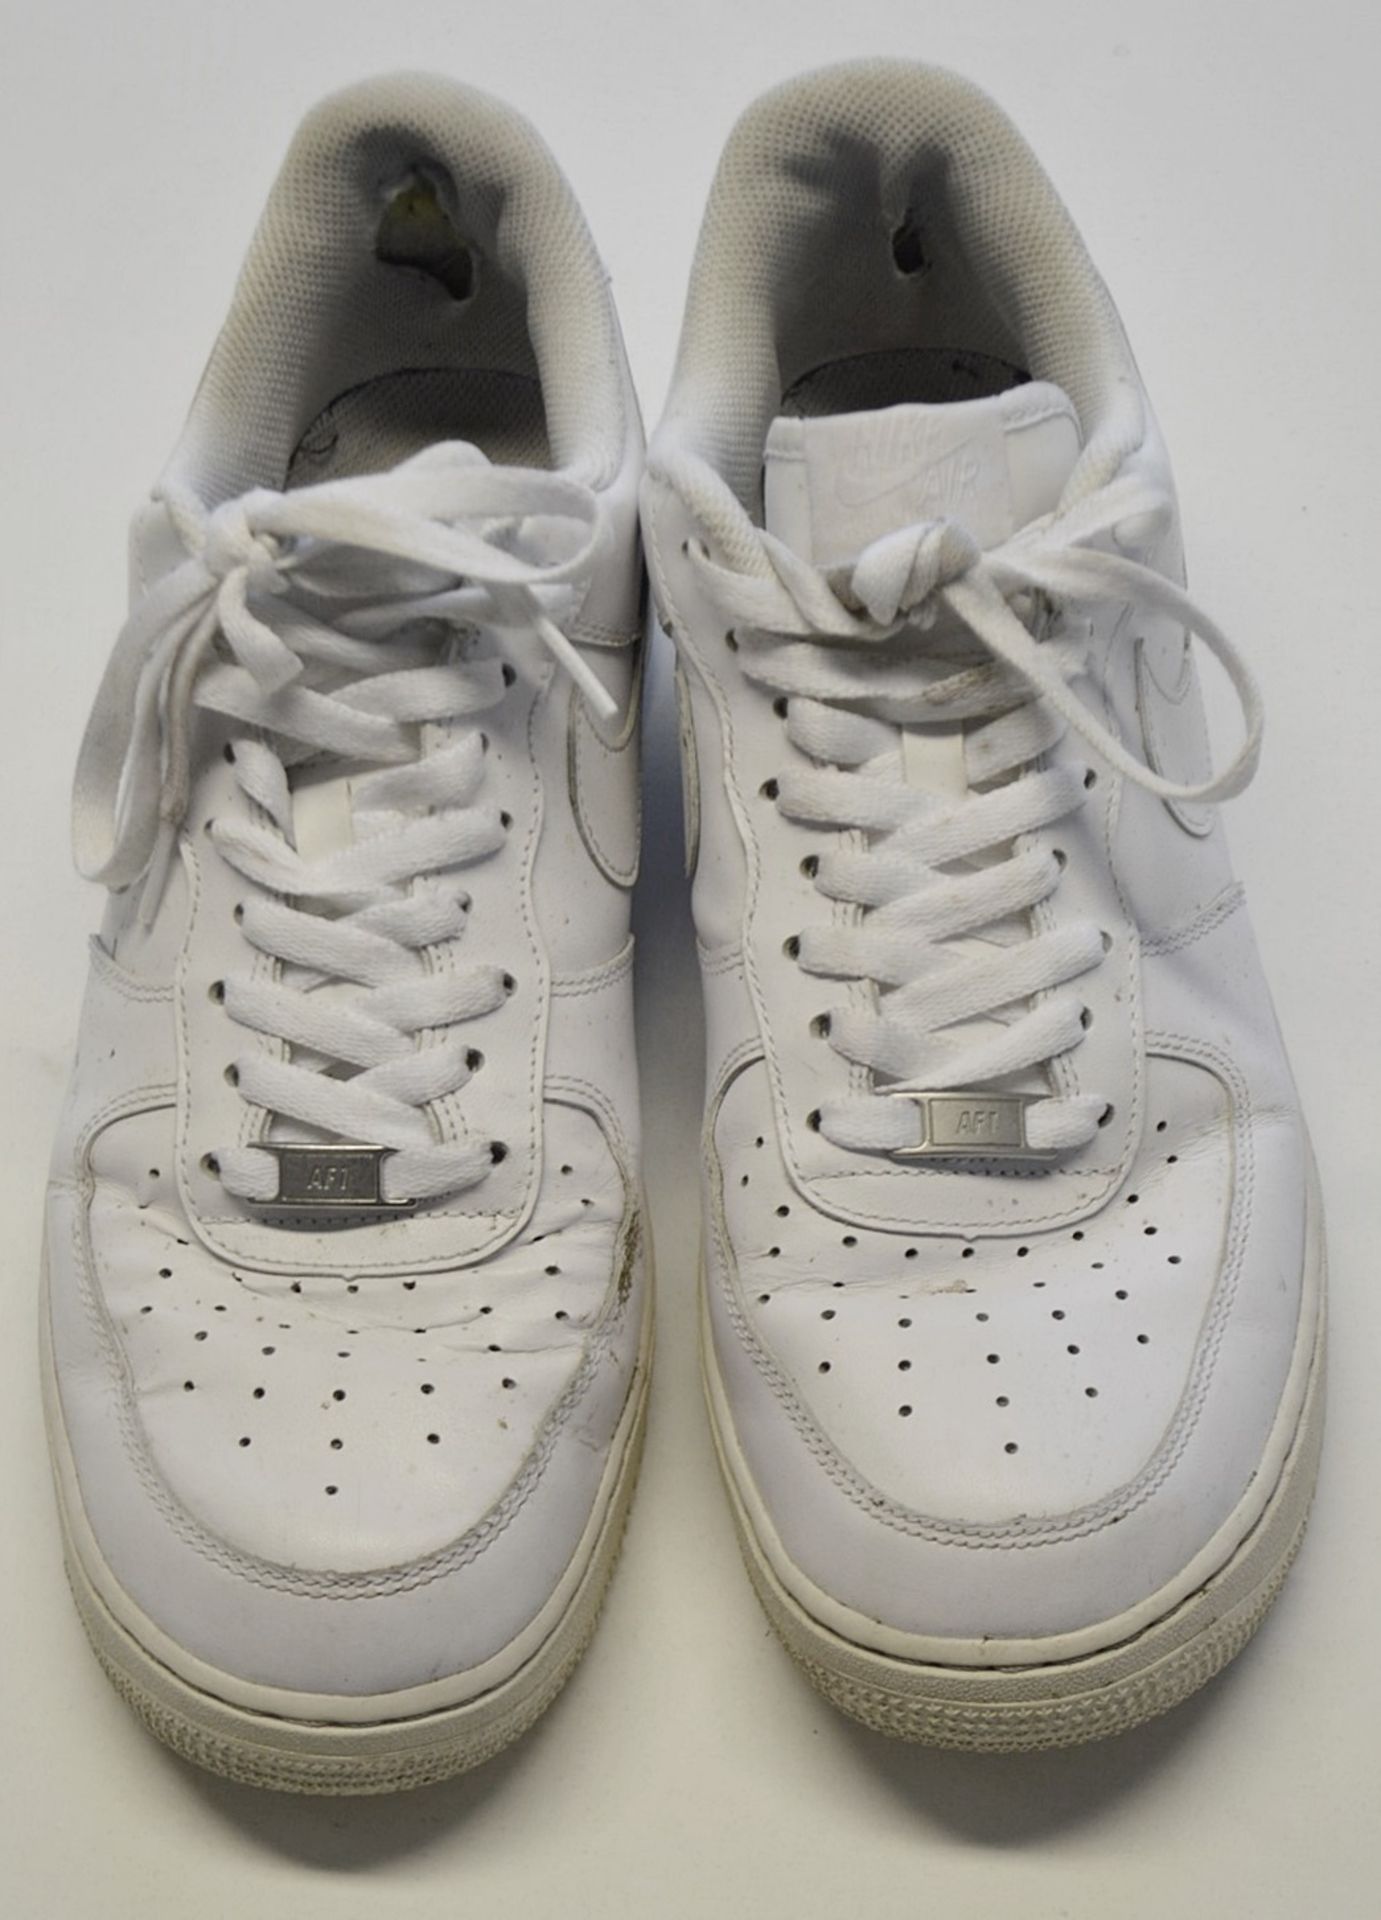 1 x Pair Of Men's Genuine Nike 'Air Force 1 Low' Trainers In White - Size (EU/UK): 44.5/9.5 - - Image 2 of 9